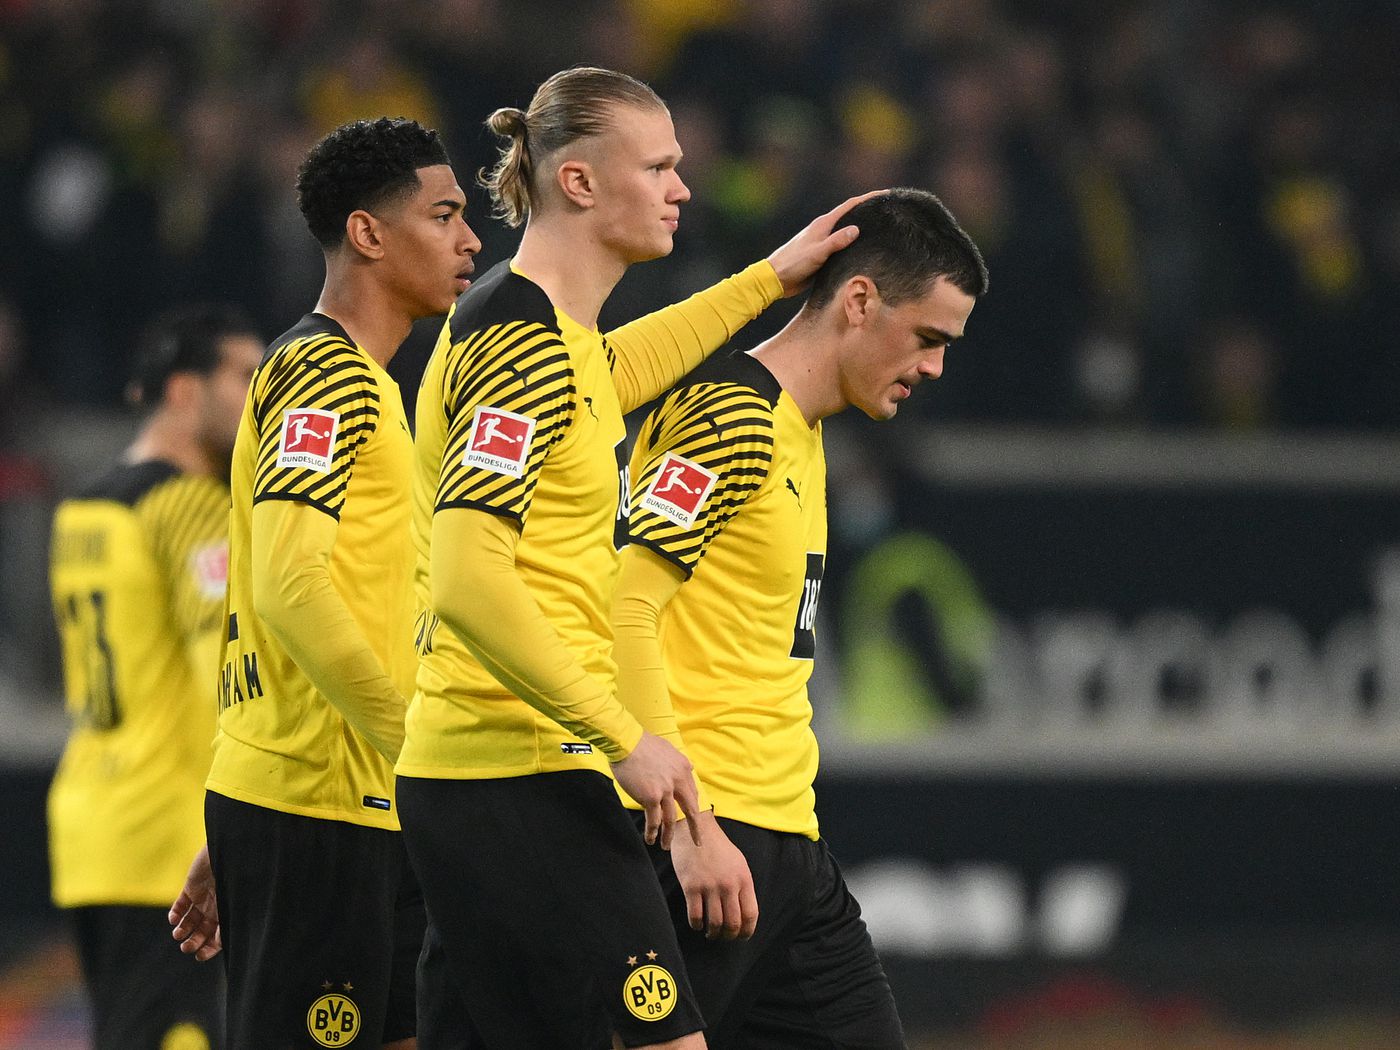 Gio Reyna subbed early for Dortmund due to injury